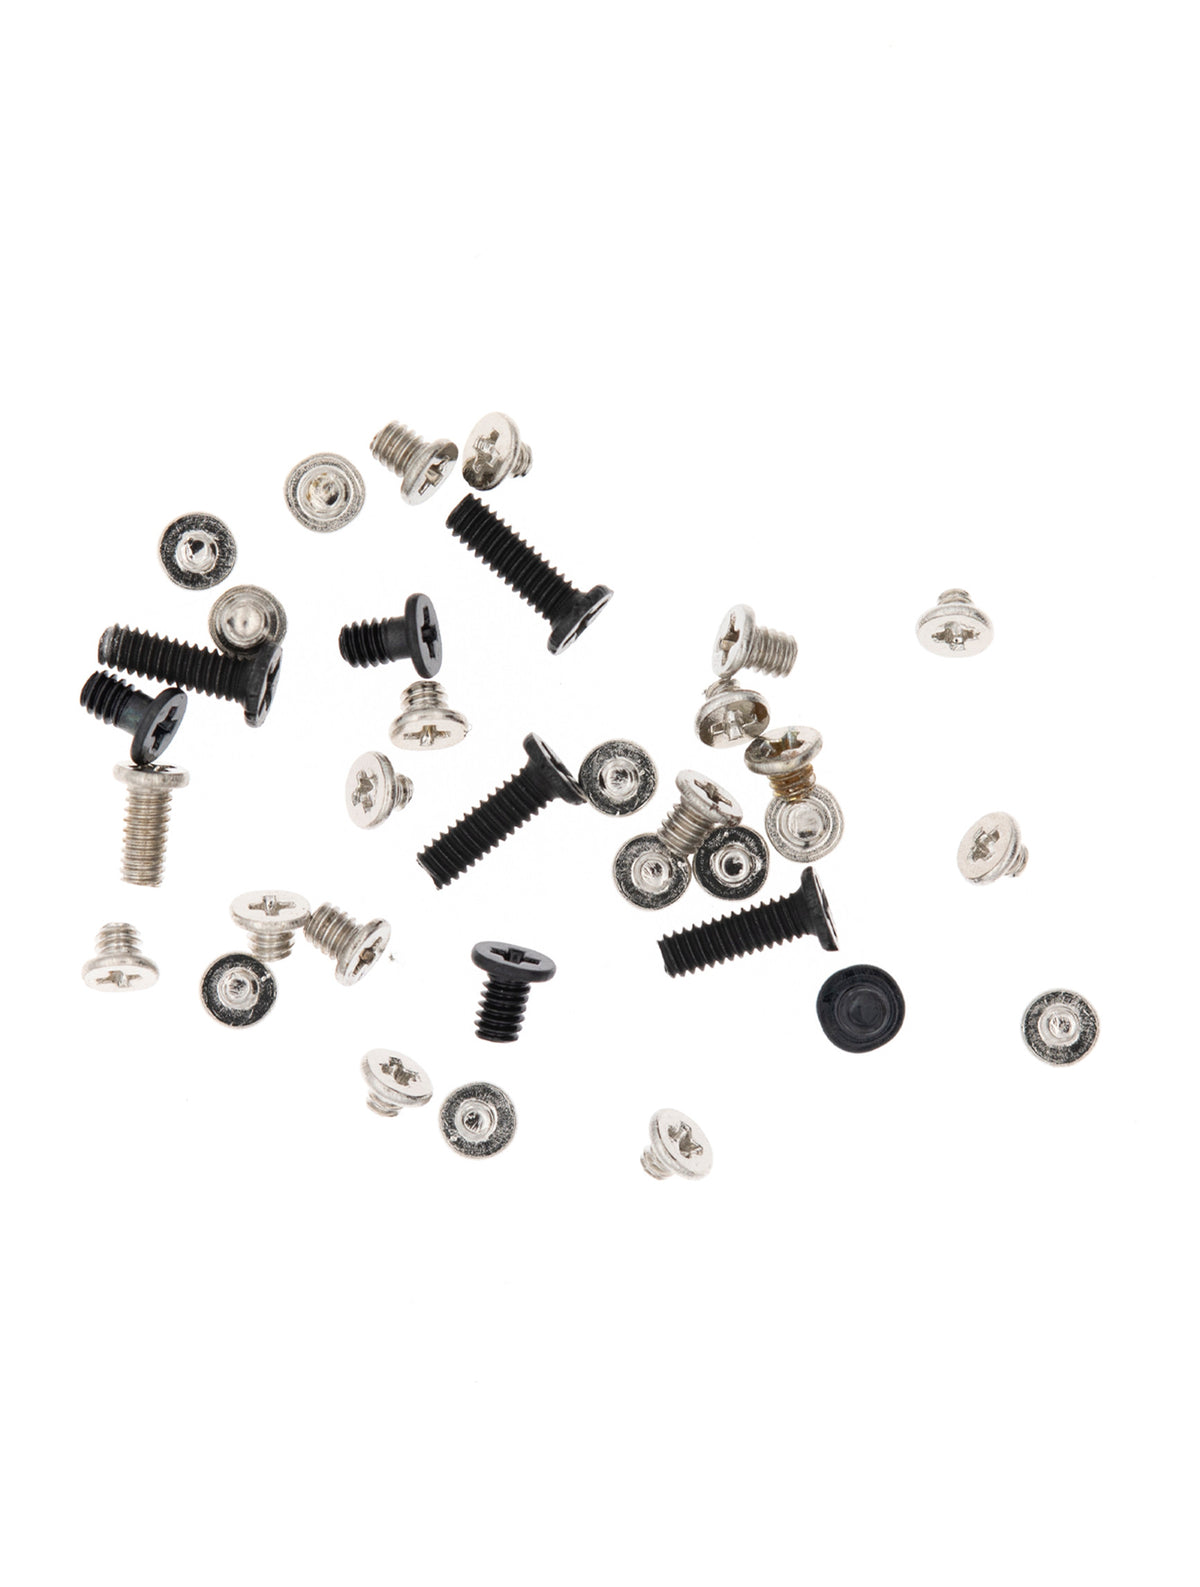 COMPLETE SCREW SET COMPATIBLE WITH IPAD AIR 3